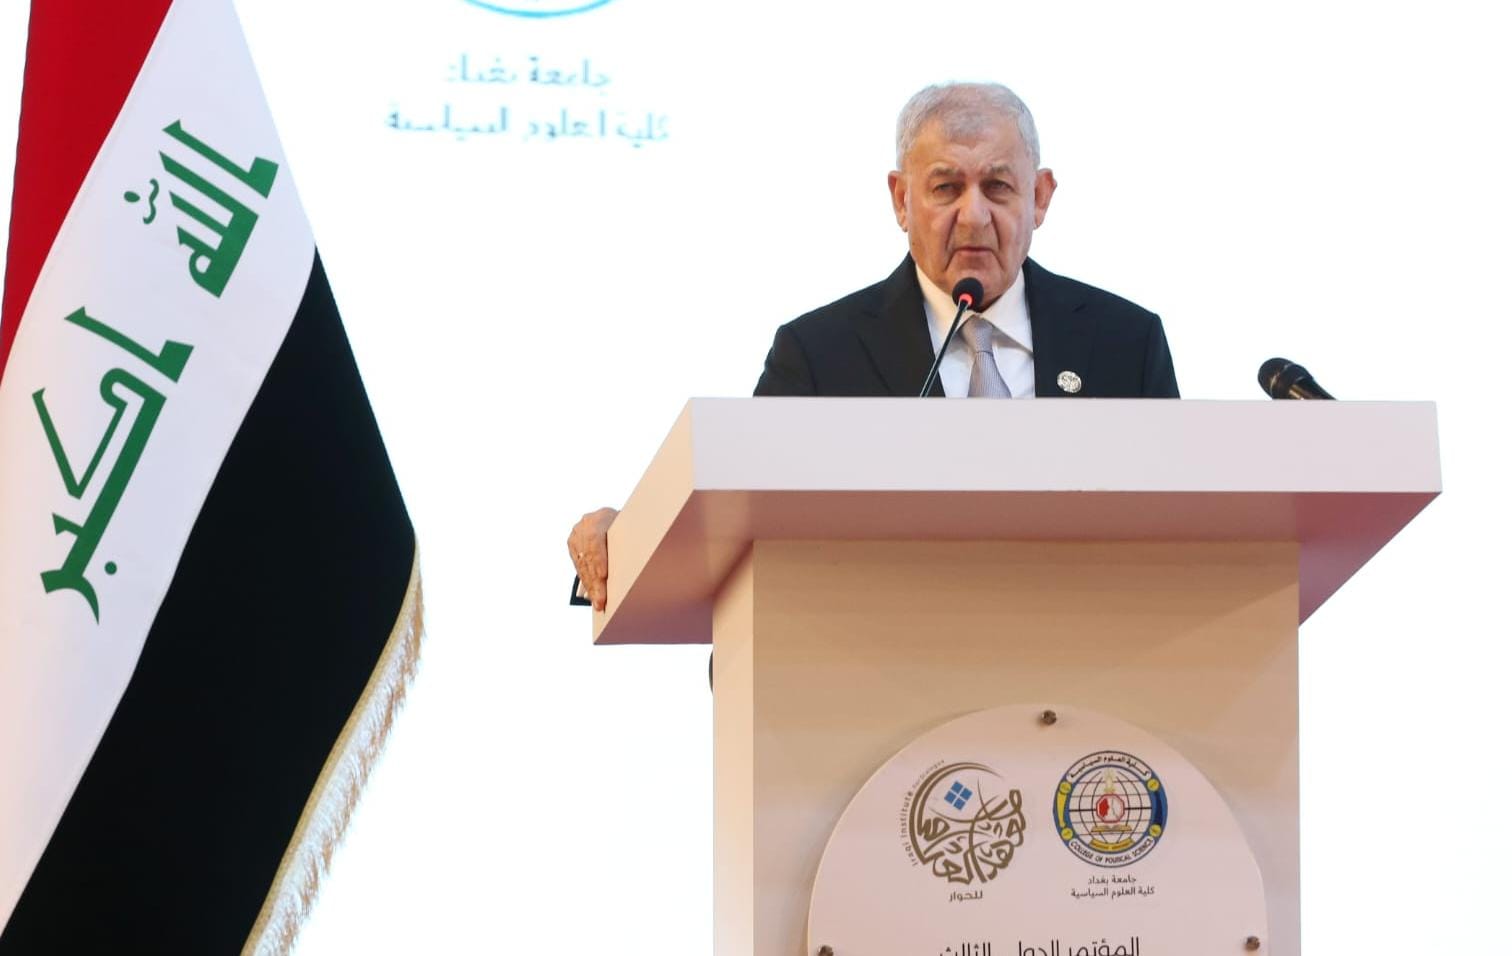 Iraq strives to reduce Greenhouse emissions, says president in climate change conference